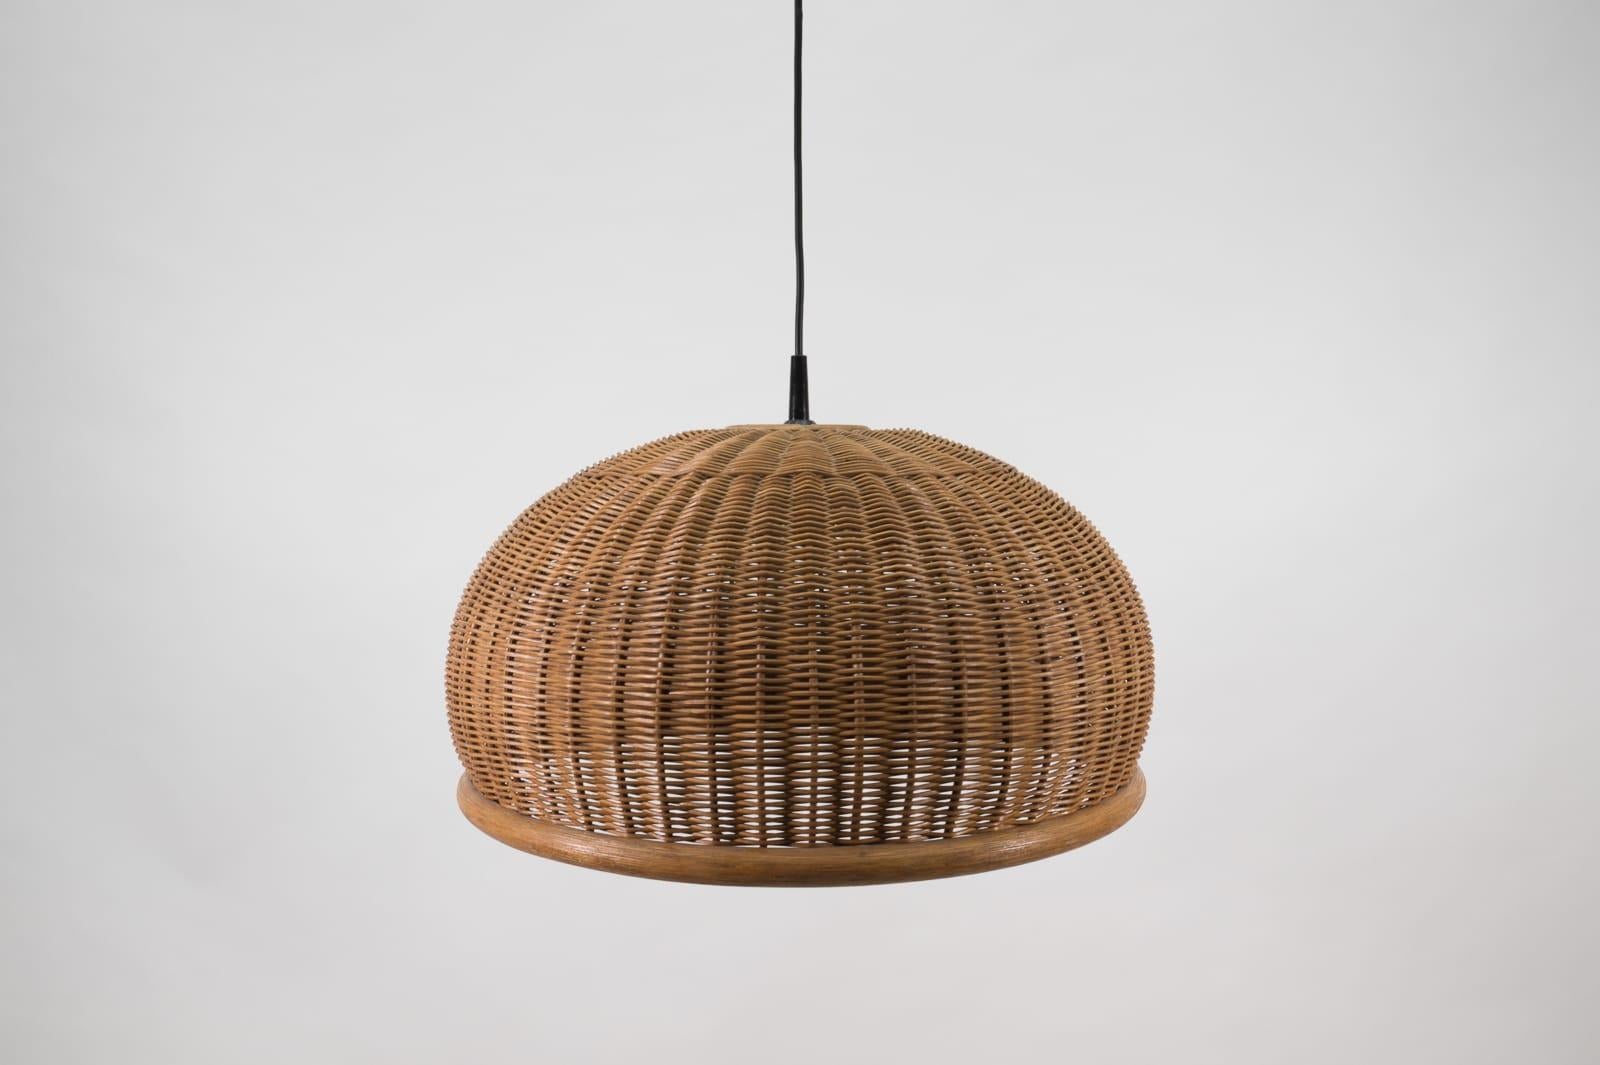 Metal Lovely Mid-Century Modern Wicker Pendant Lamp, 1960s Italy For Sale